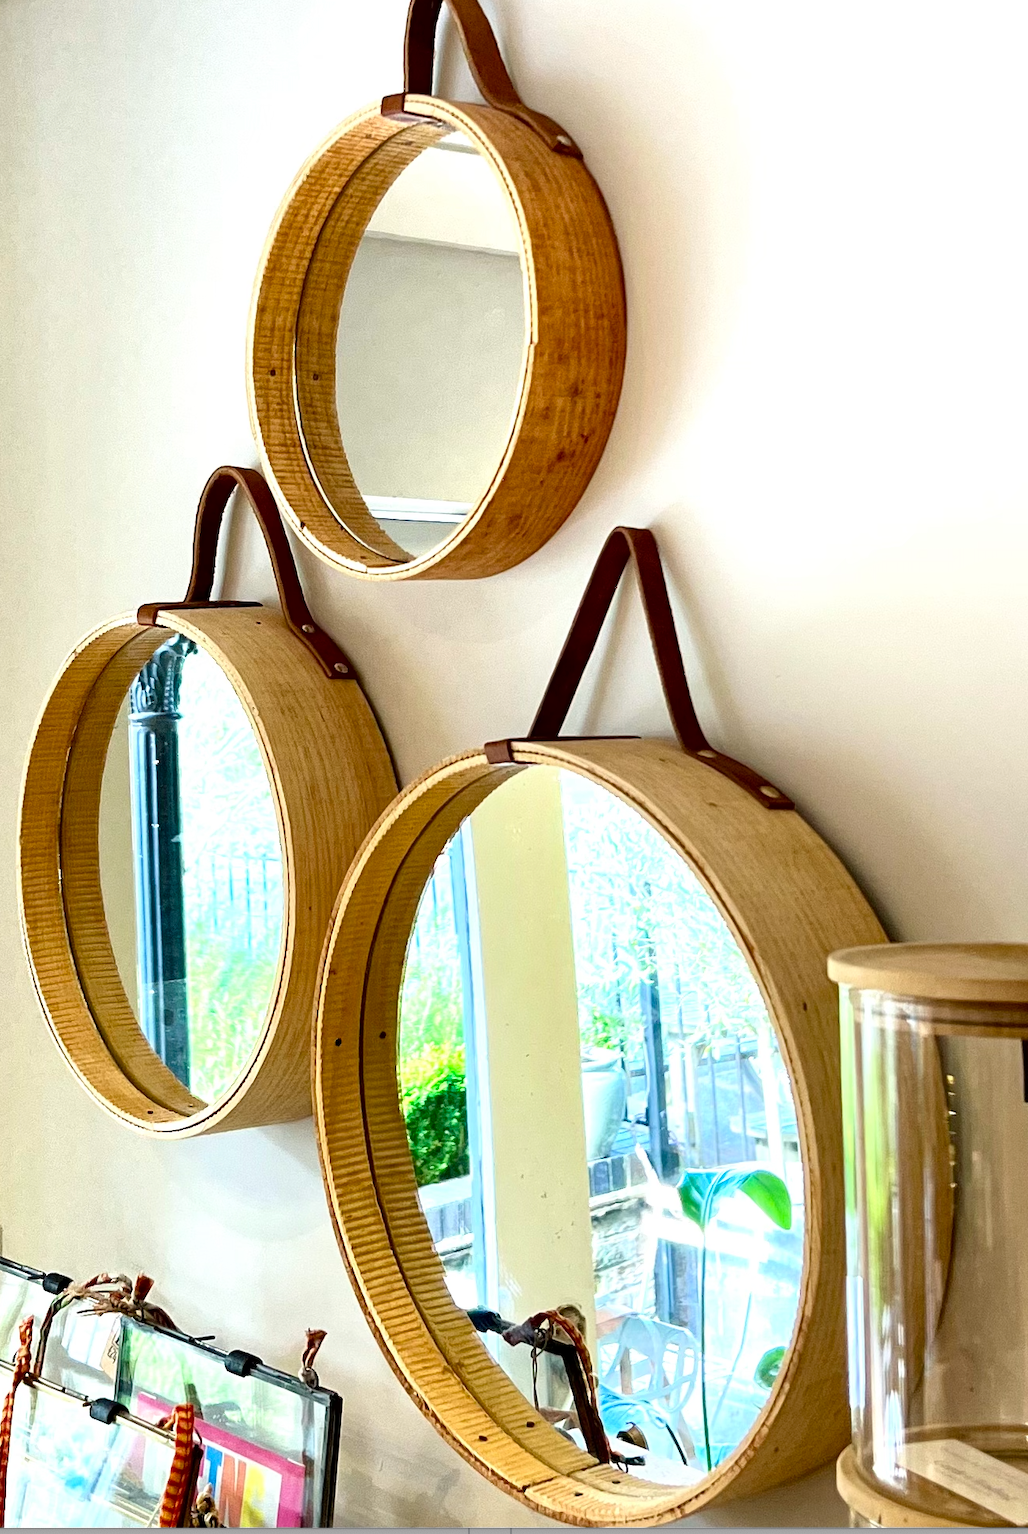 Round rustic mirrors made with wood and leather